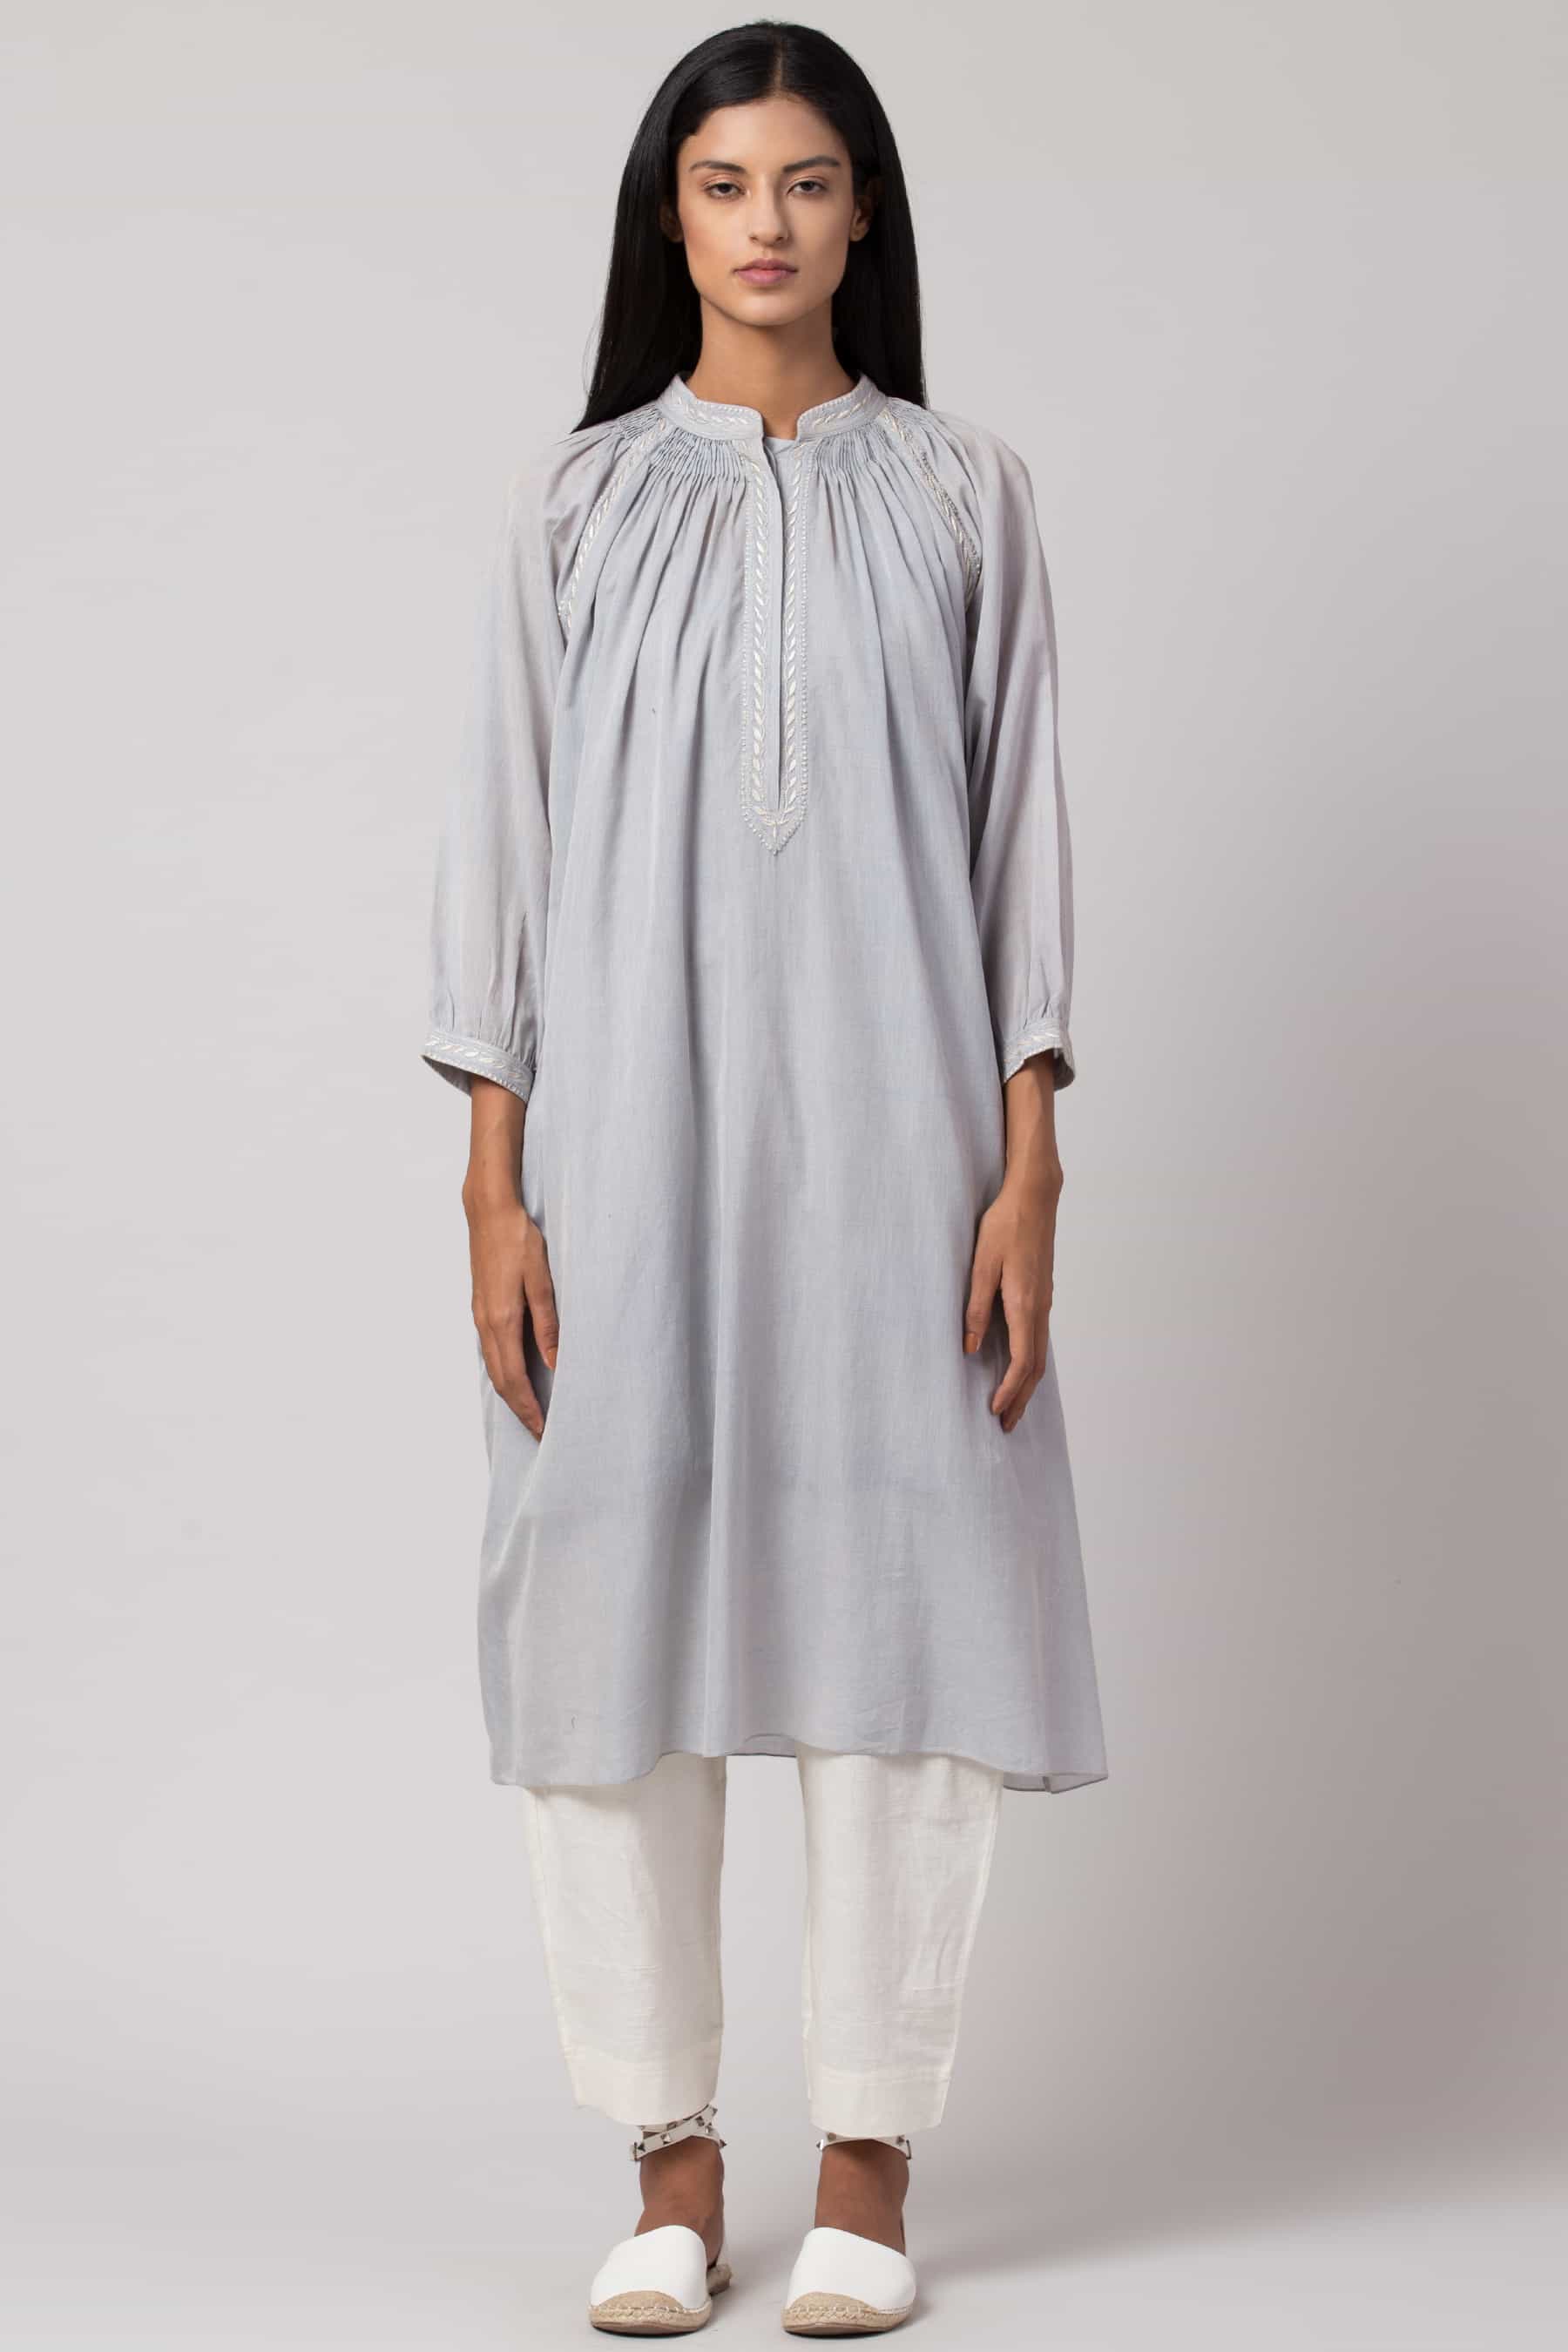 Baby blue Chikankari tunic made in 100% handwoven yarn dyed cotton Chanderi - front